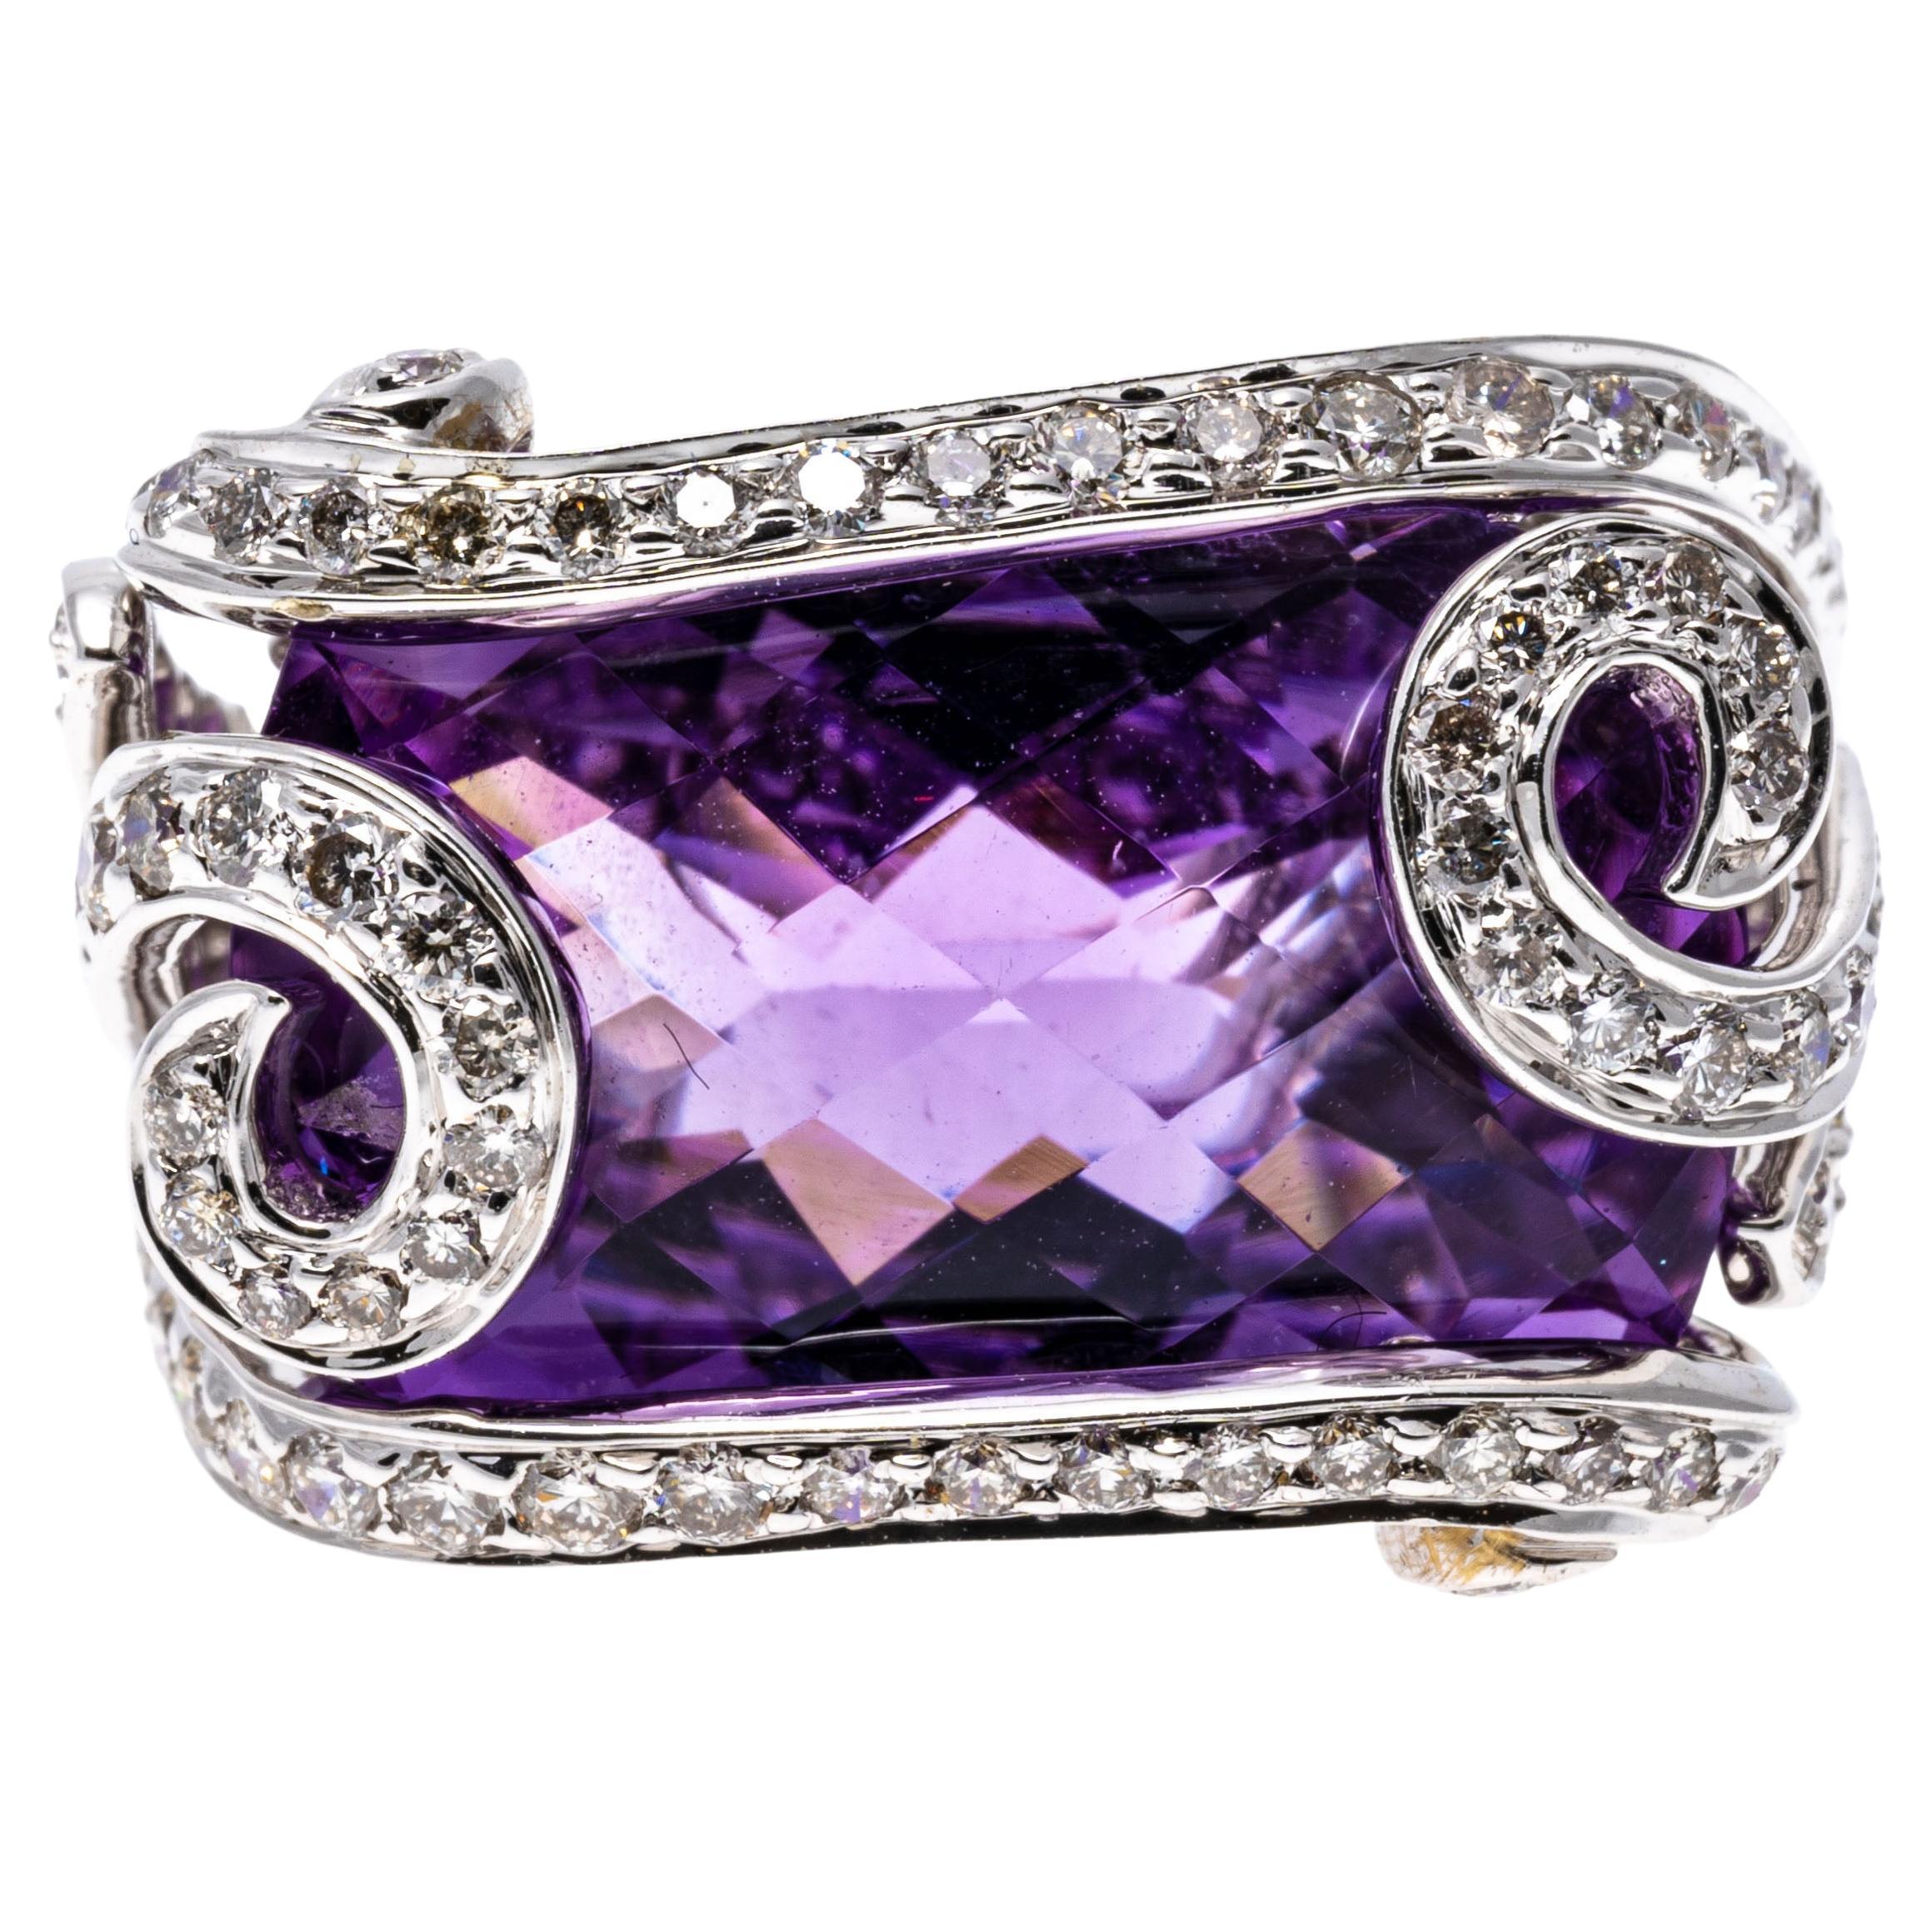 18k White Gold Caged Rectangular Checkerboard Amethyst and Diamond Ring